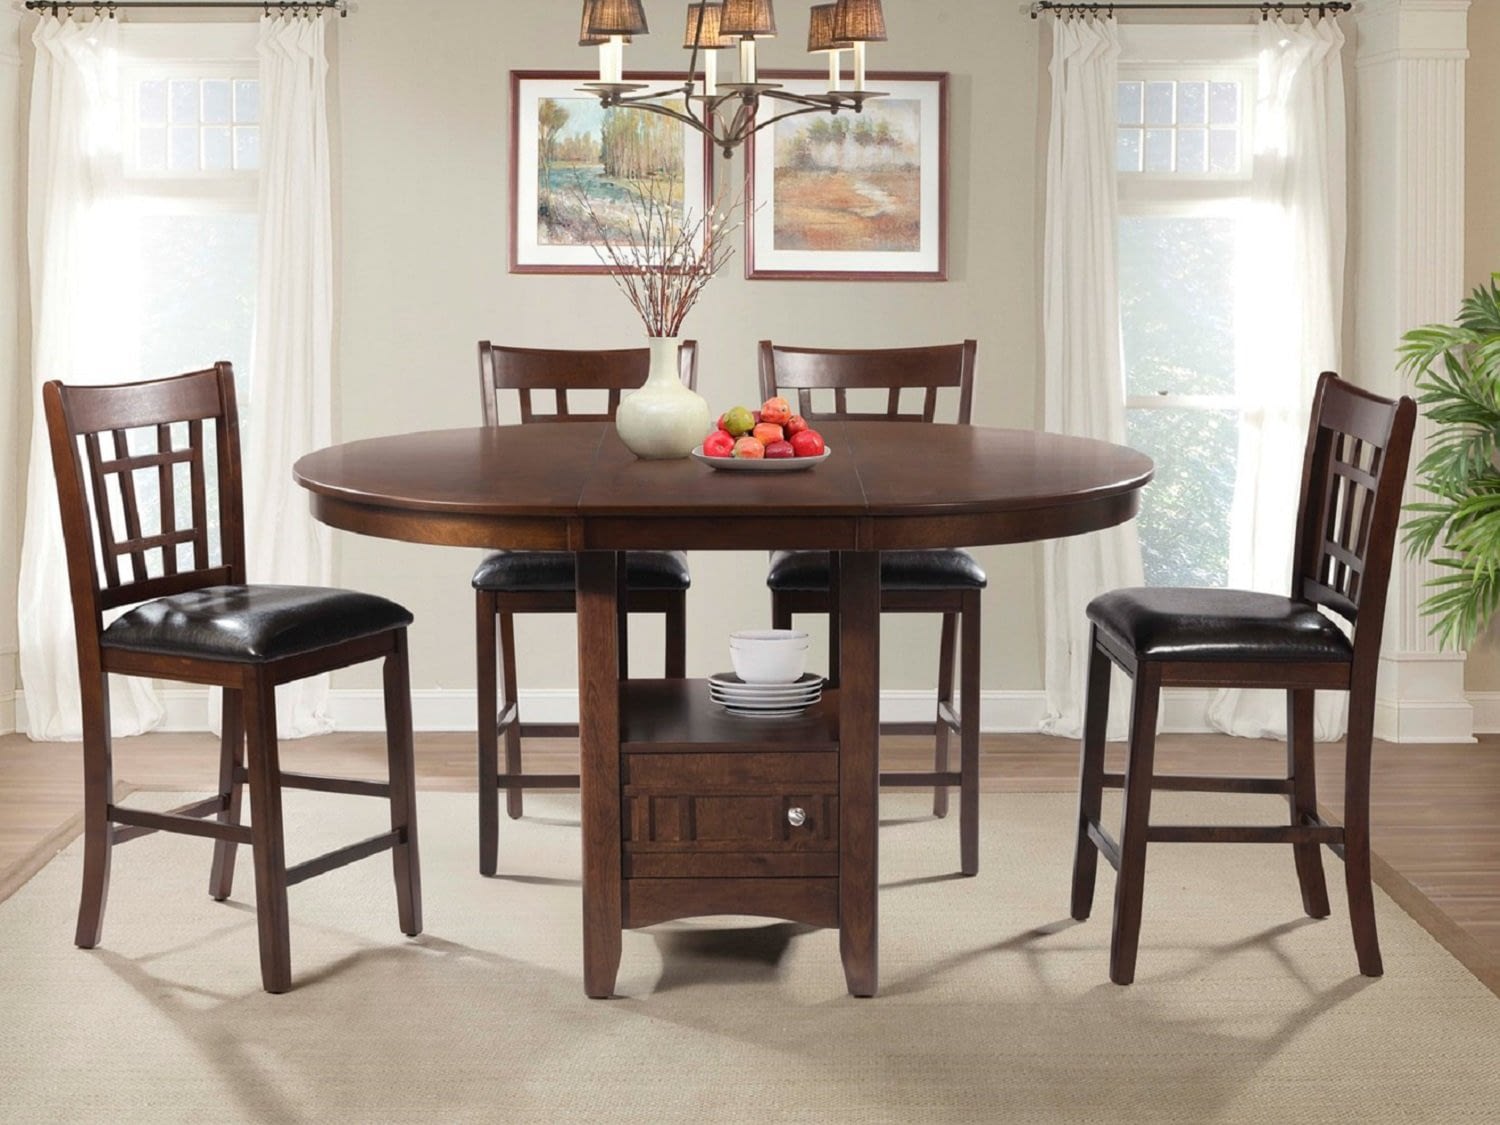 MARINA Counter Height Dining Table & 4 Chairs